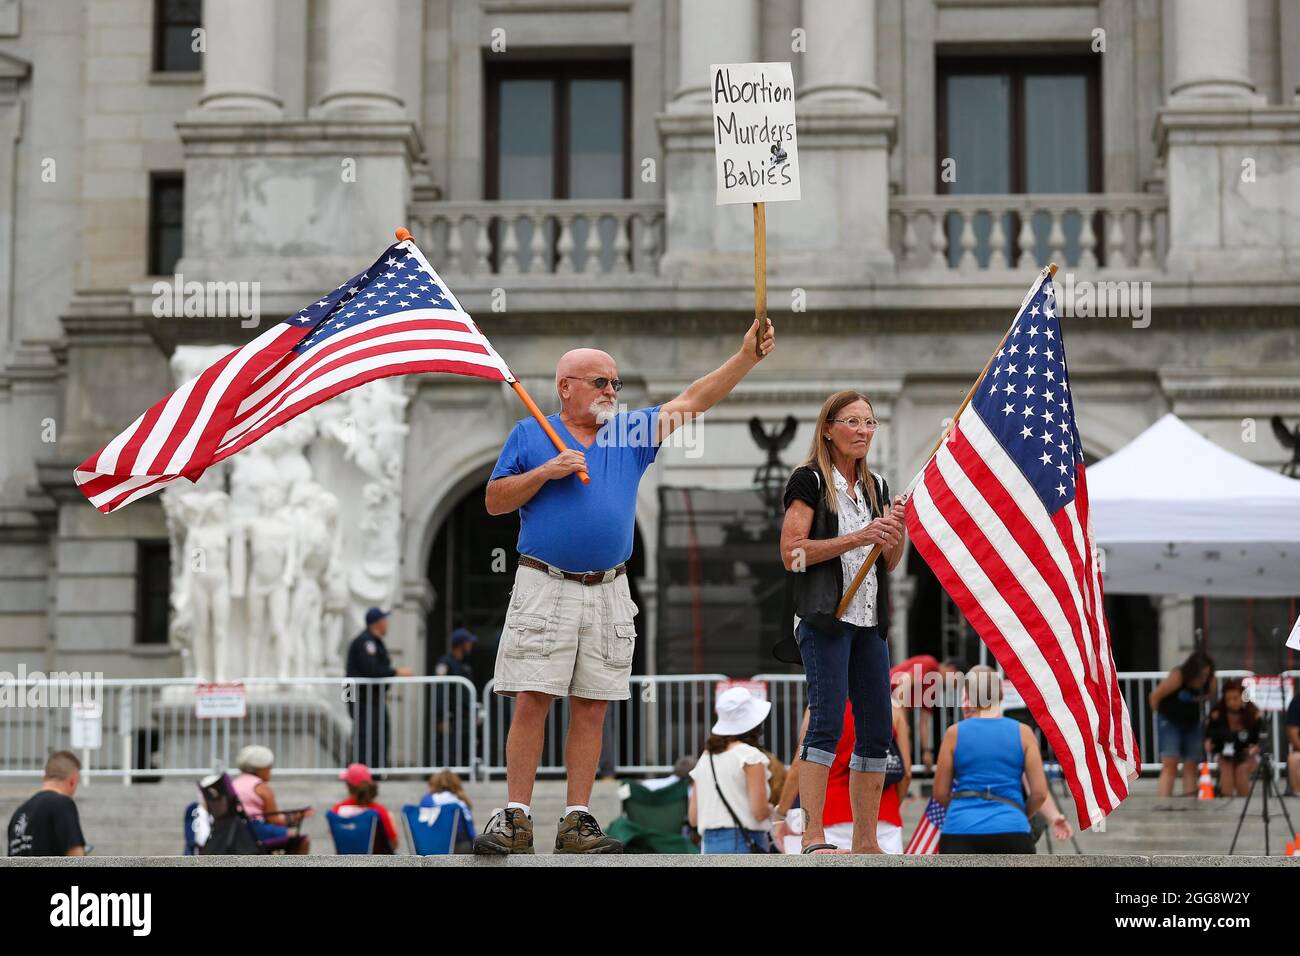 Harrisburg, United States. 29th Aug, 2021. A protester holds an anti-abortion sign at the Rally for Freedom in Harrisburg, Pennsylvania on August 29, 2021. (Photo by Paul Weaver/Sipa USA) Credit: Sipa USA/Alamy Live News Stock Photo